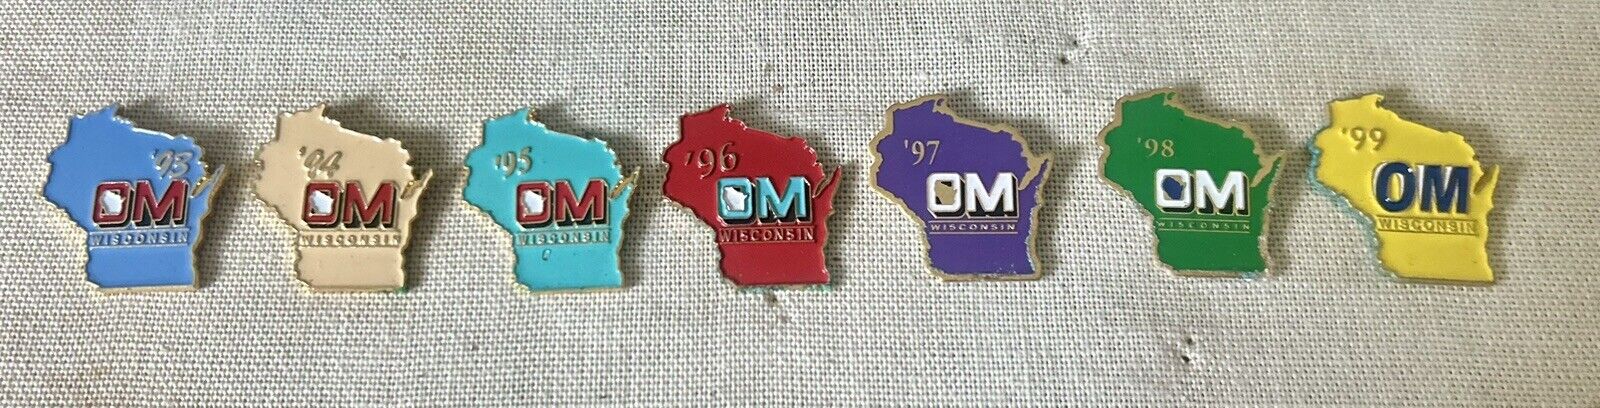 Vintage Odyssey of the Mind   1993-1999 Wisconsin Pinback Lapel Pin OOTM